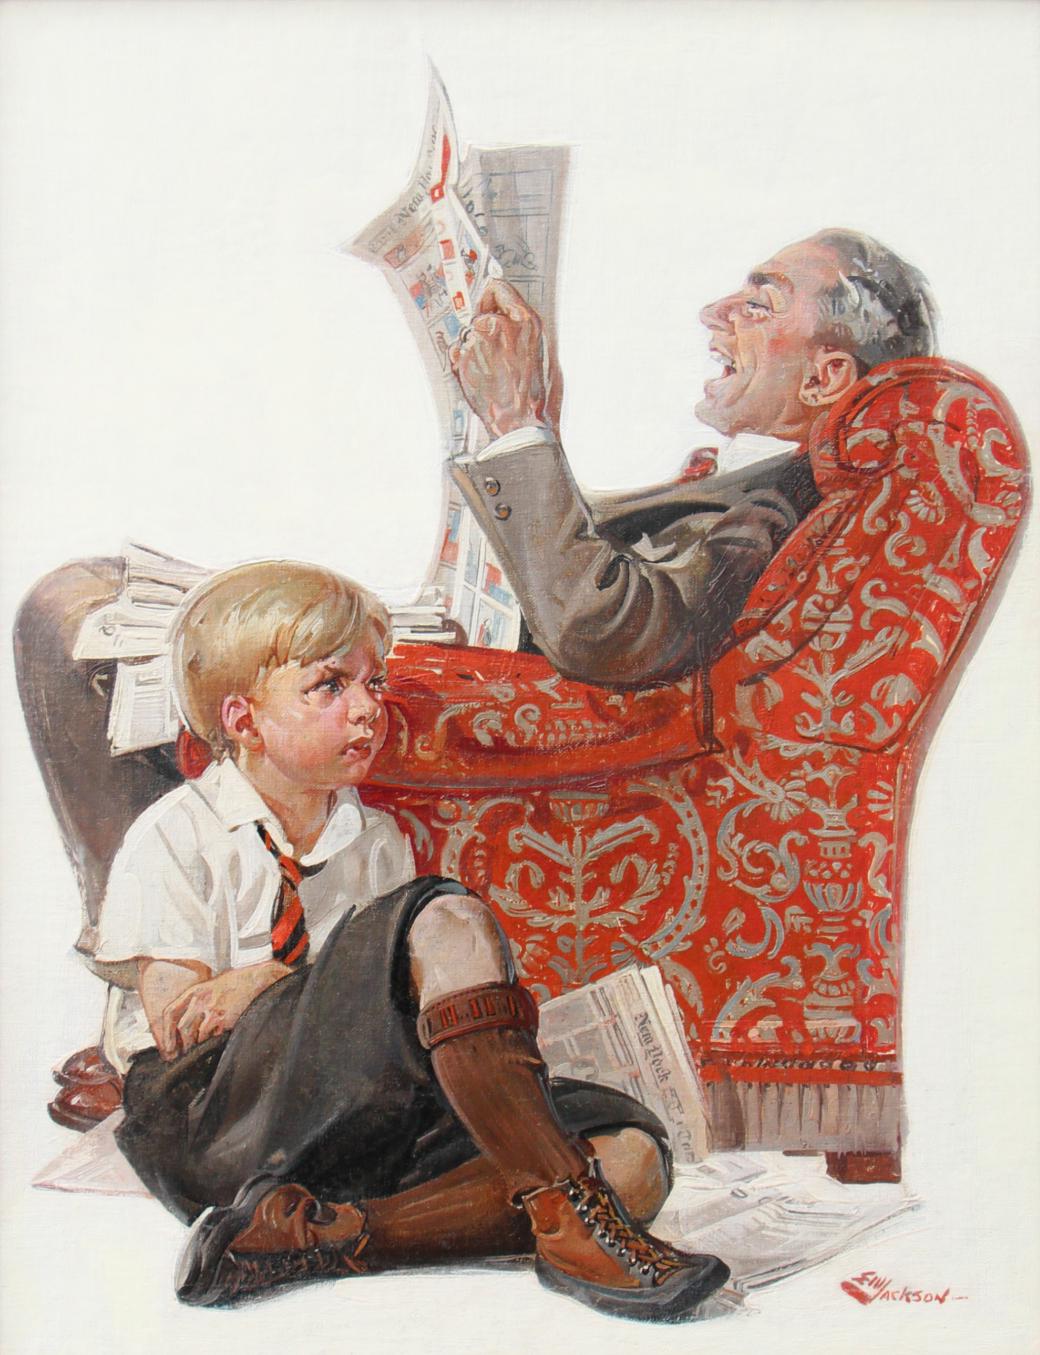 Stealing The Funnies, Collier's Magazine Cover, 1923 - Painting by E.M. Jackson